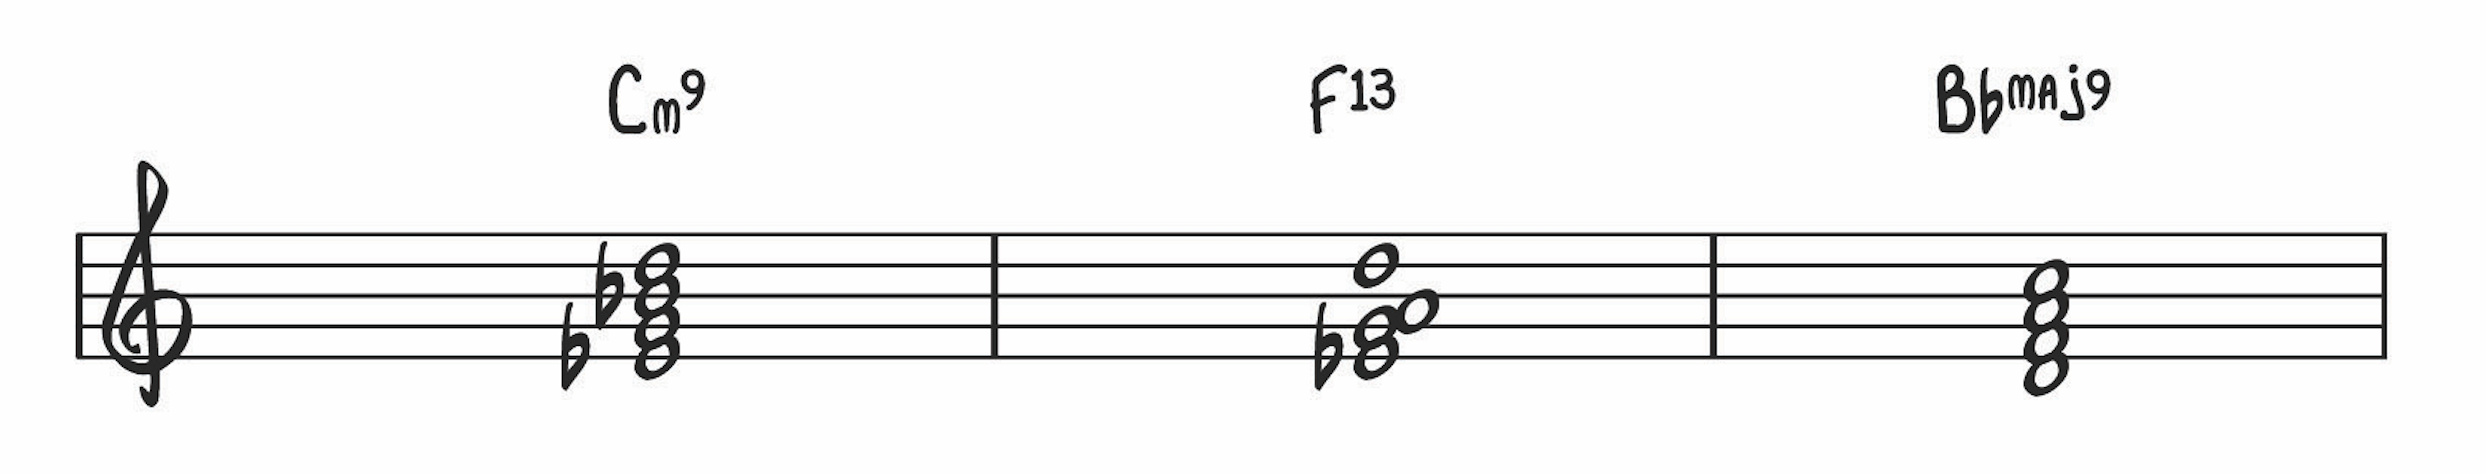 4_note_rootless_voicings_251_Bb_Major